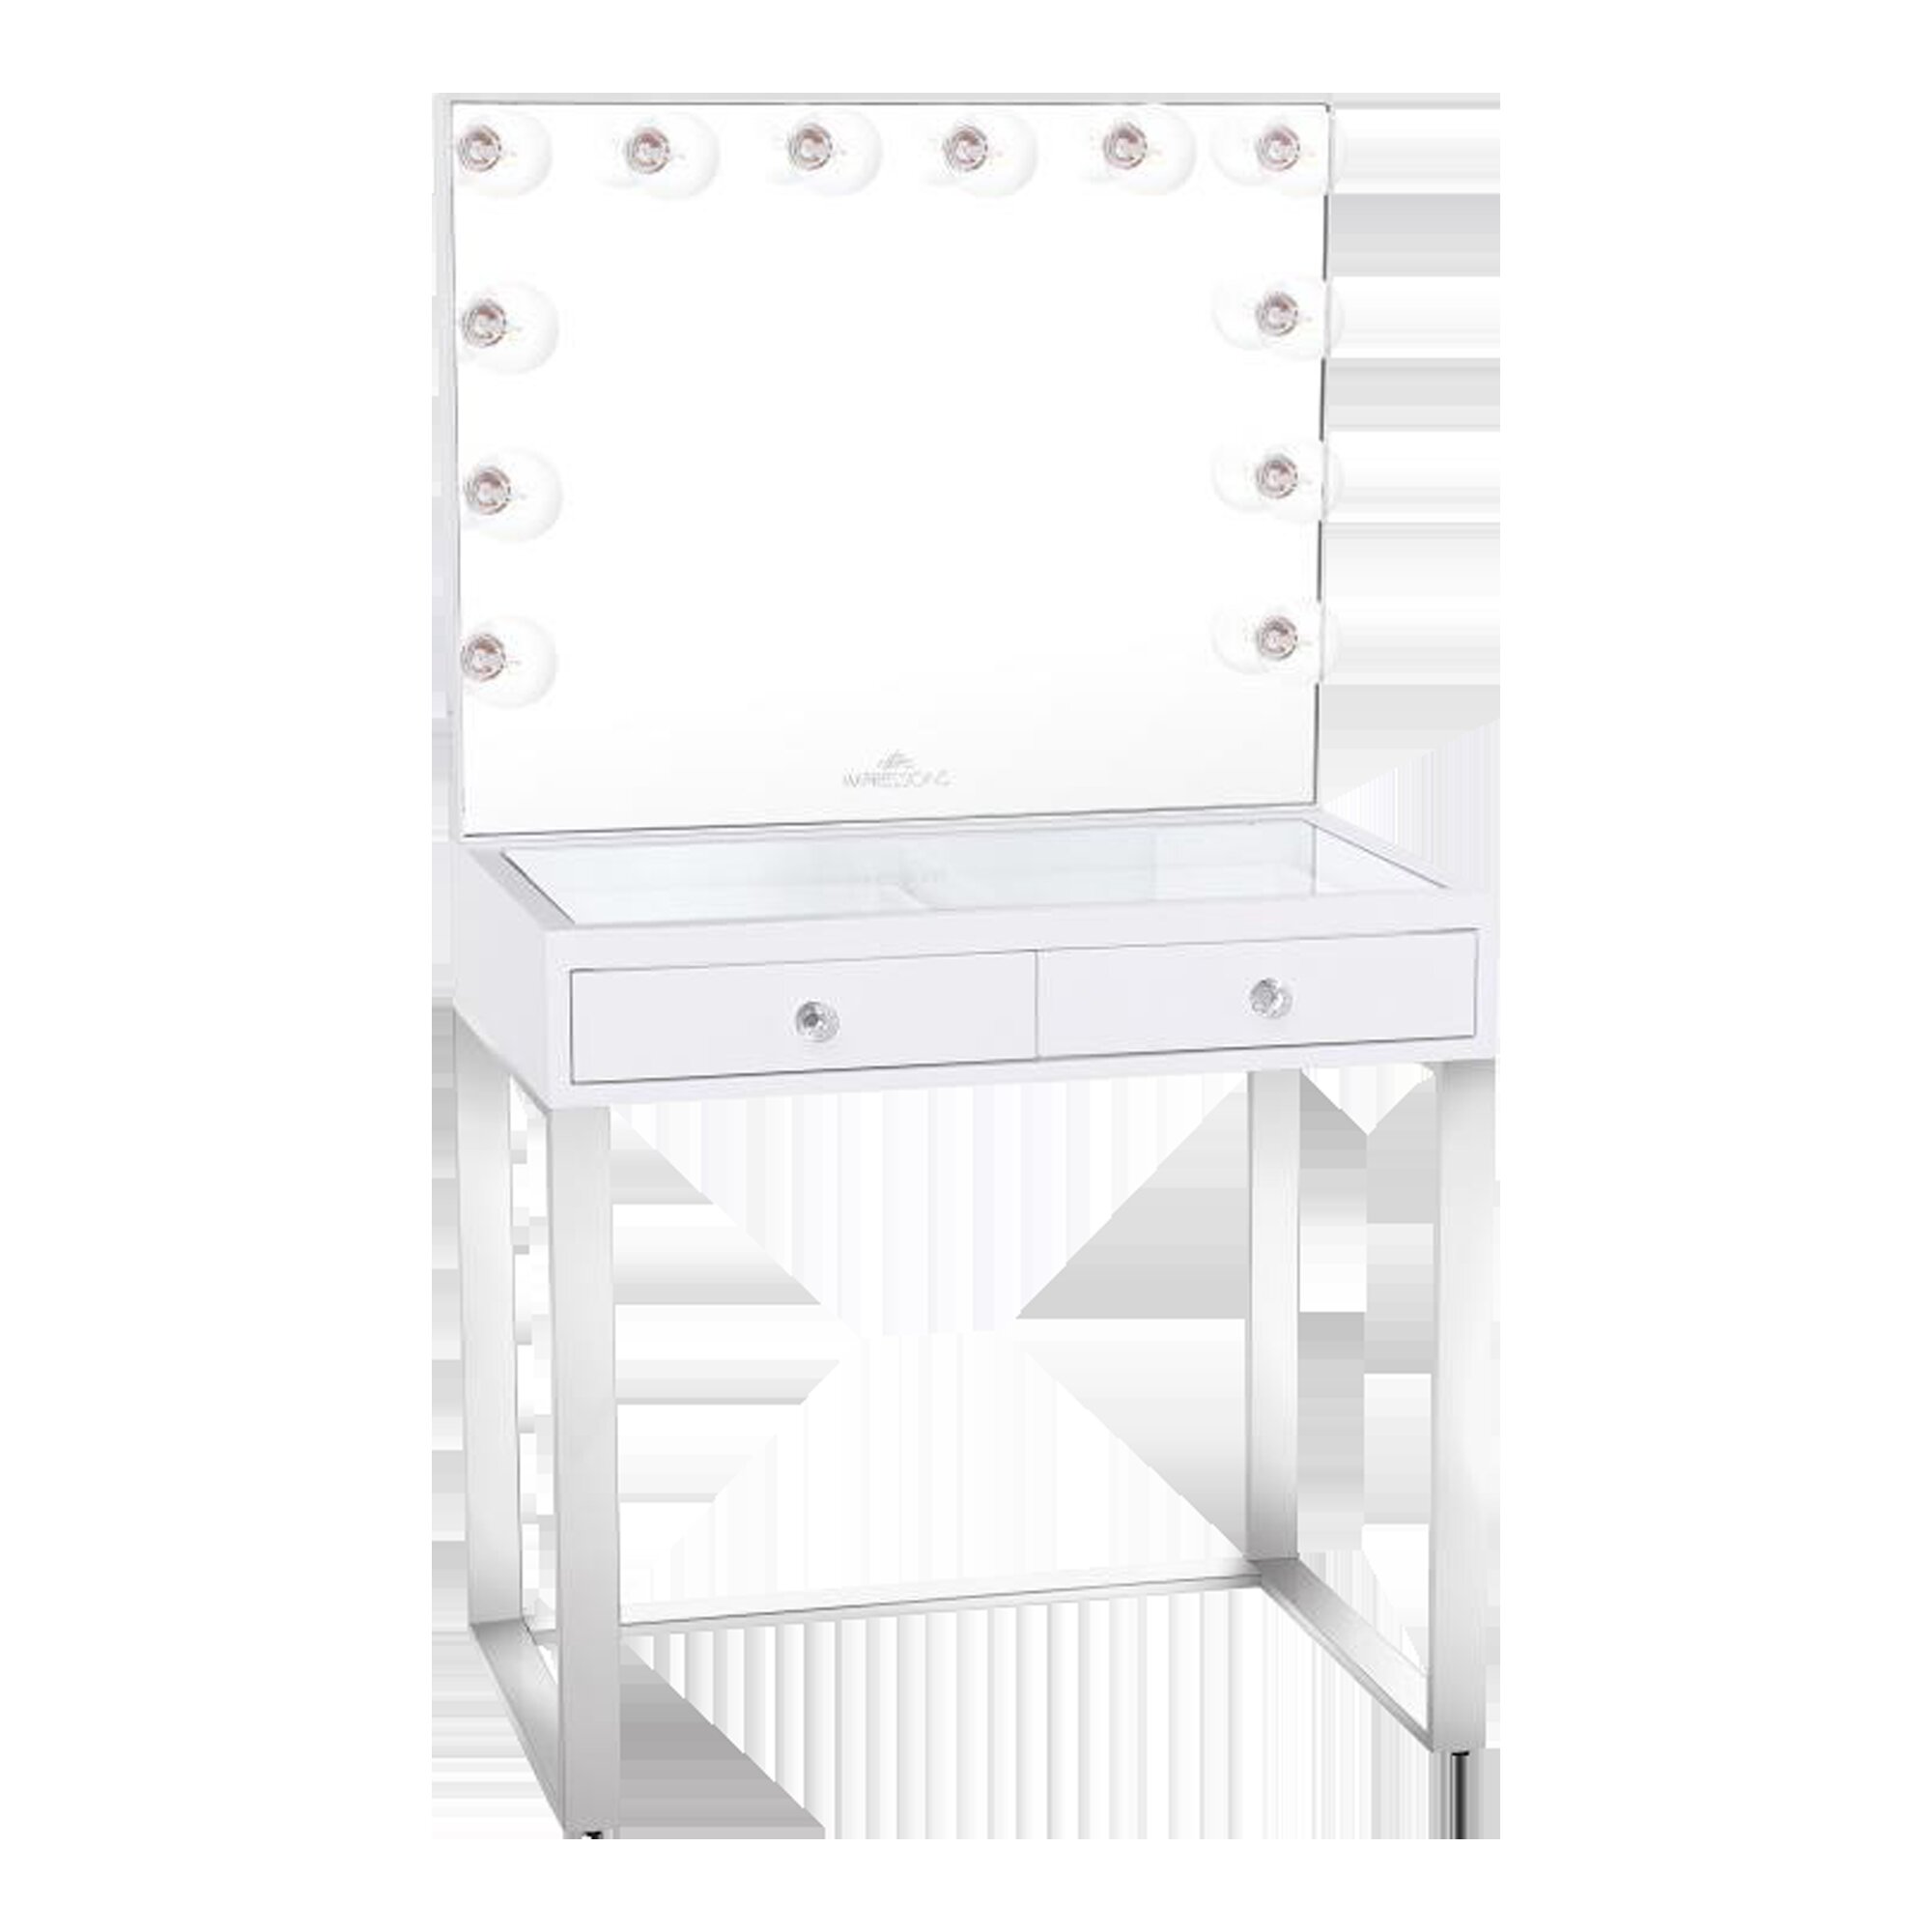 Mini SlayStation Kylie 1.0 Vanity Table with Clear View Glass Top + Vanity Mirror Bundle for Desk Everly Quinn Color: Silver